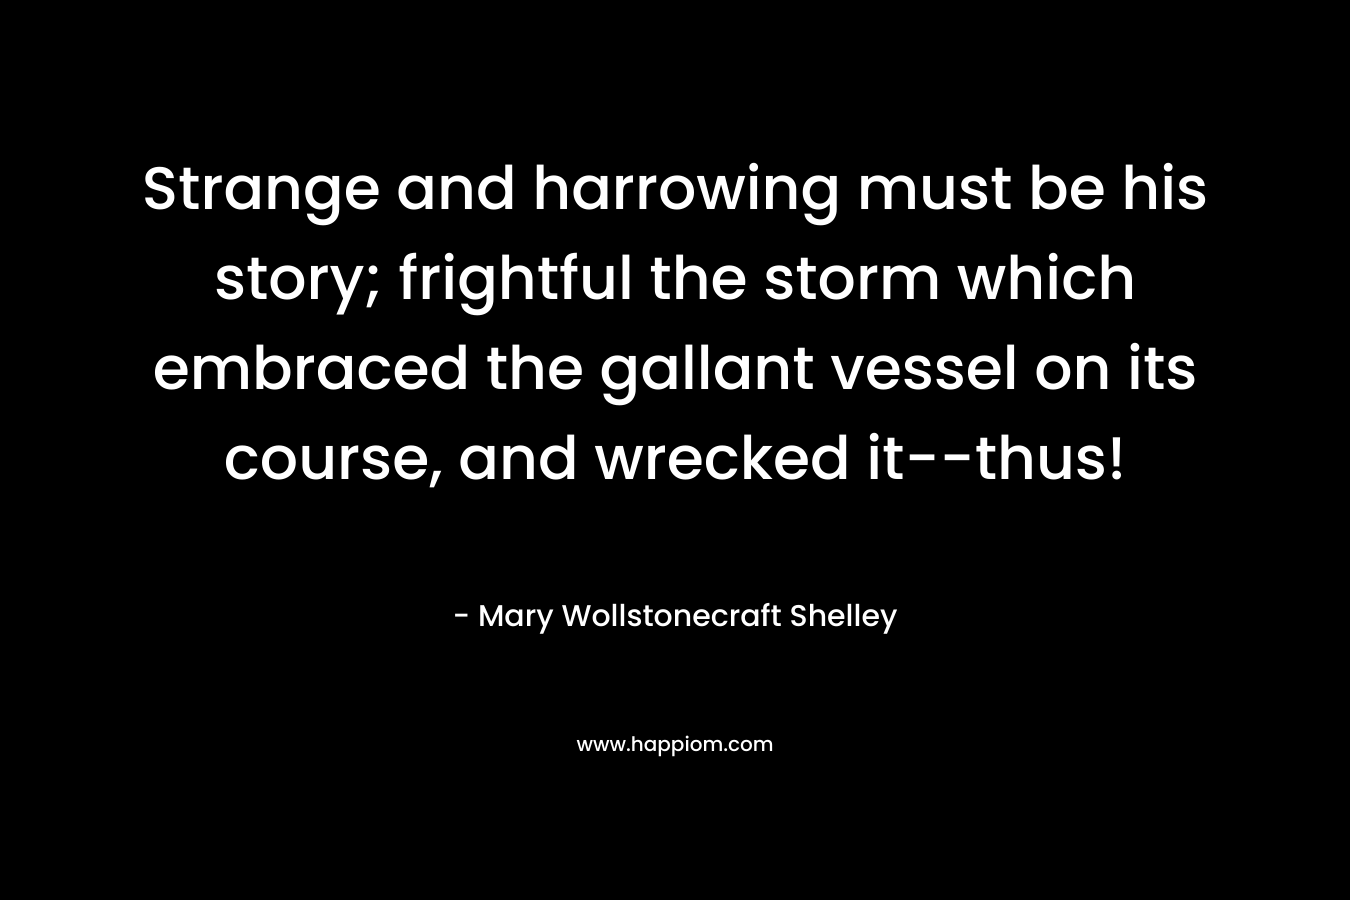 Strange and harrowing must be his story; frightful the storm which embraced the gallant vessel on its course, and wrecked it–thus! – Mary Wollstonecraft Shelley